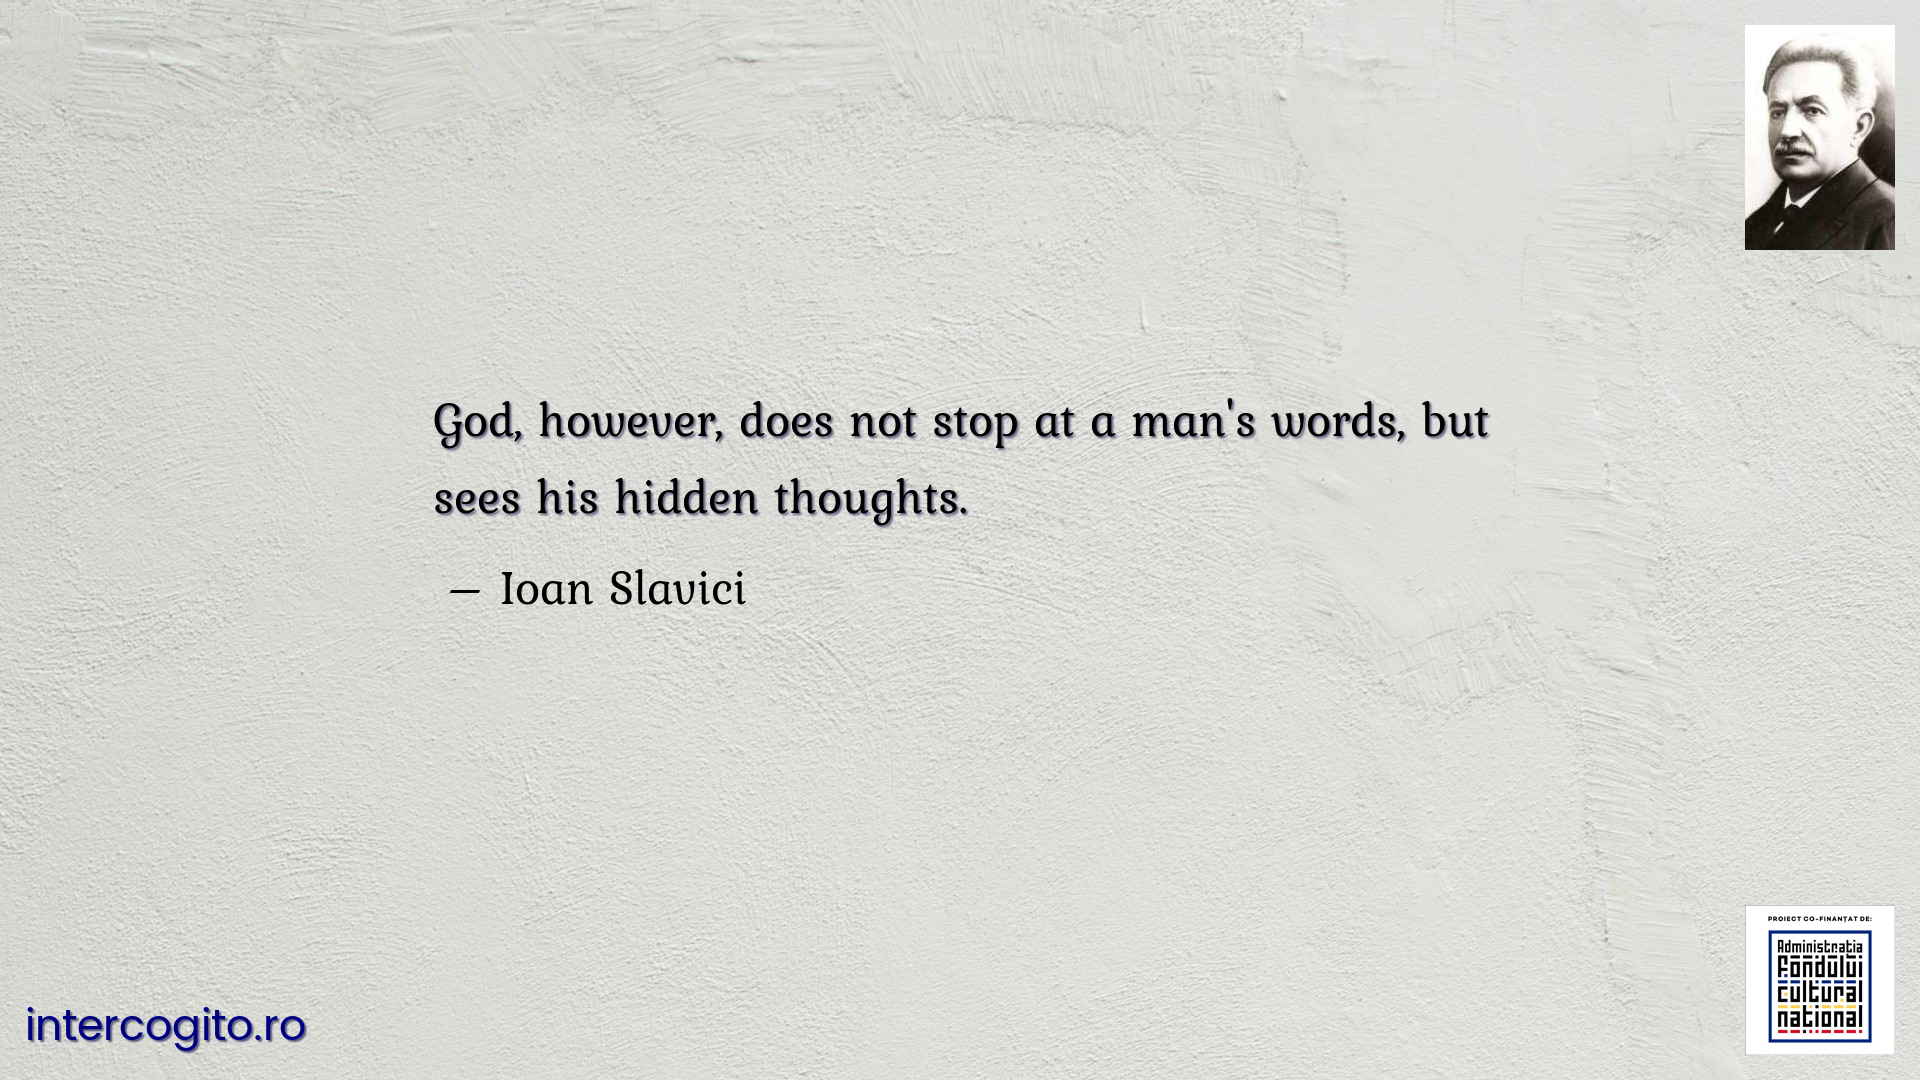 God, however, does not stop at a man's words, but sees his hidden thoughts.